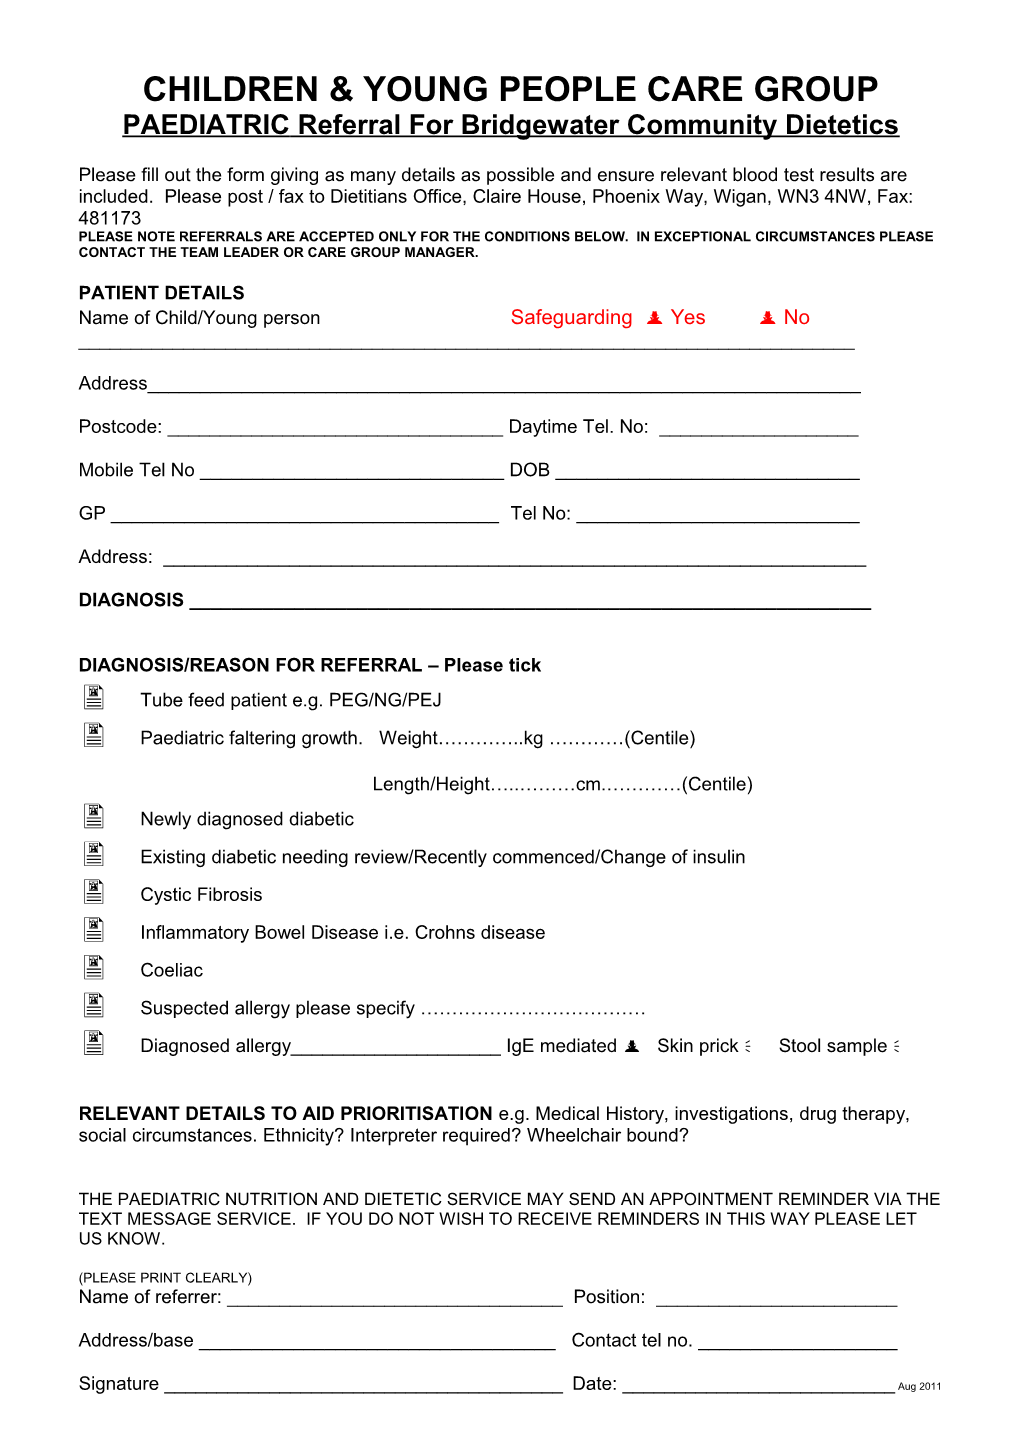 Nutrition and Dietetic Referral Form